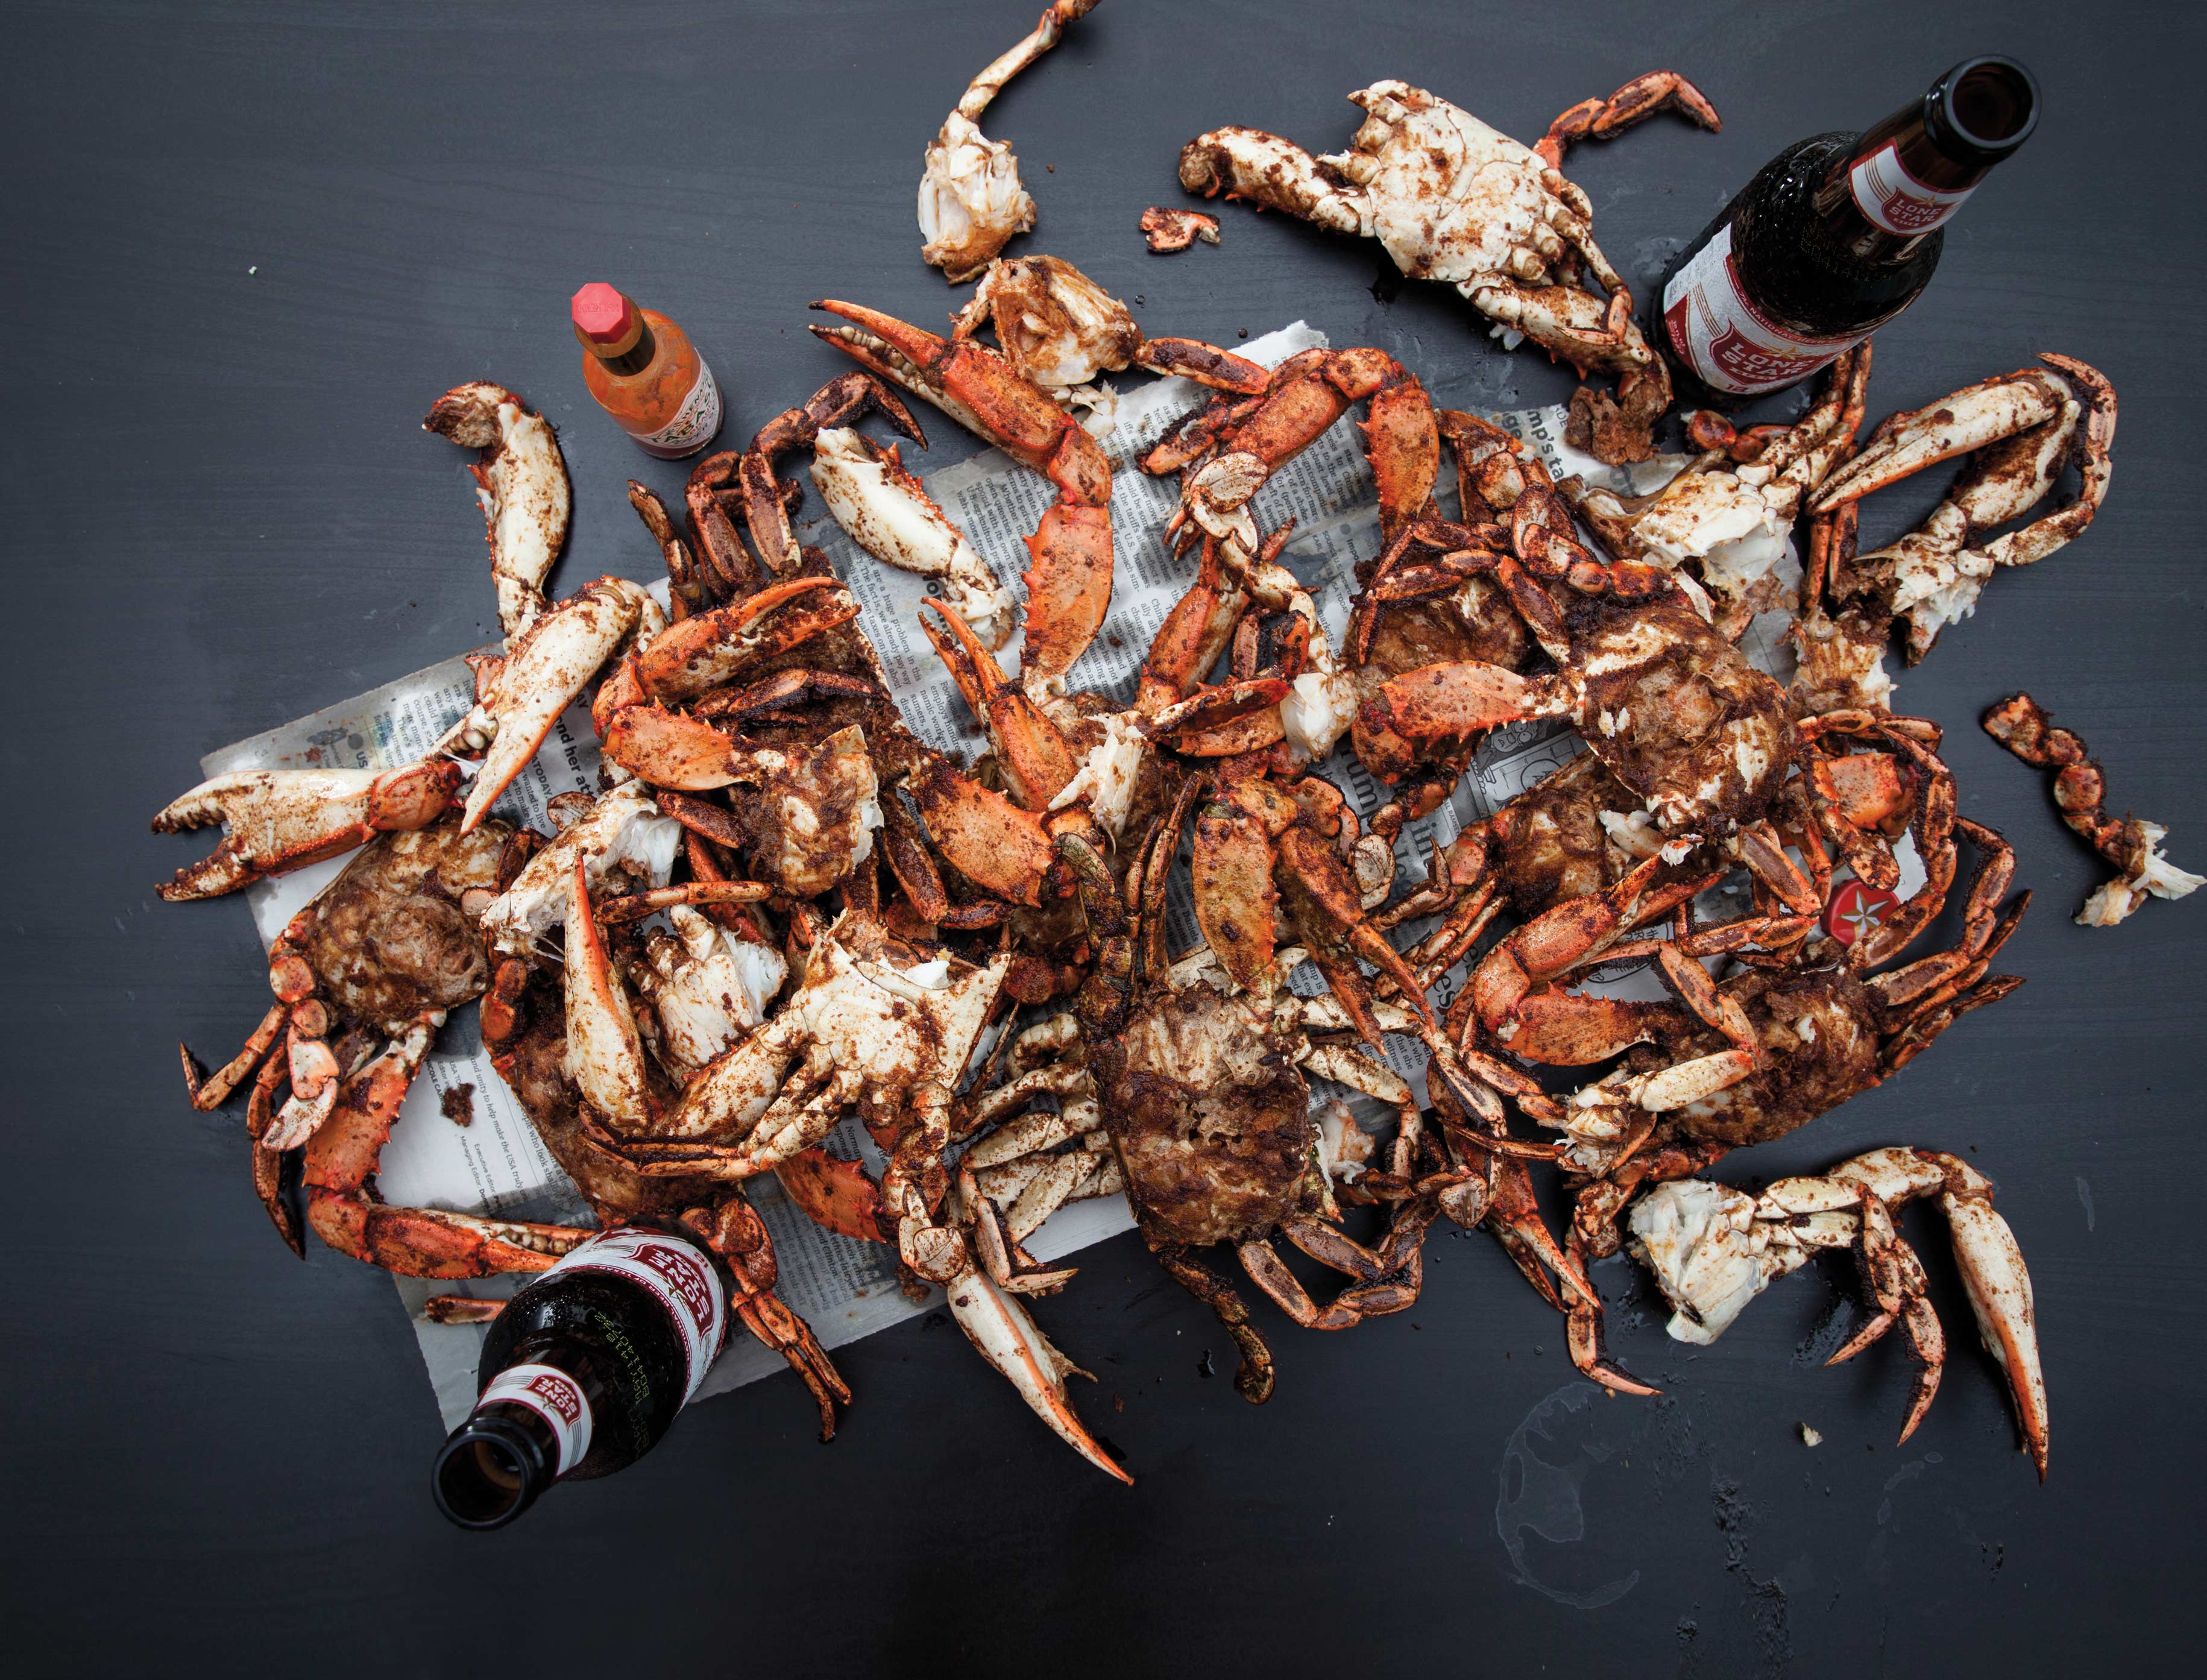 A pile of barbecued crab on a table